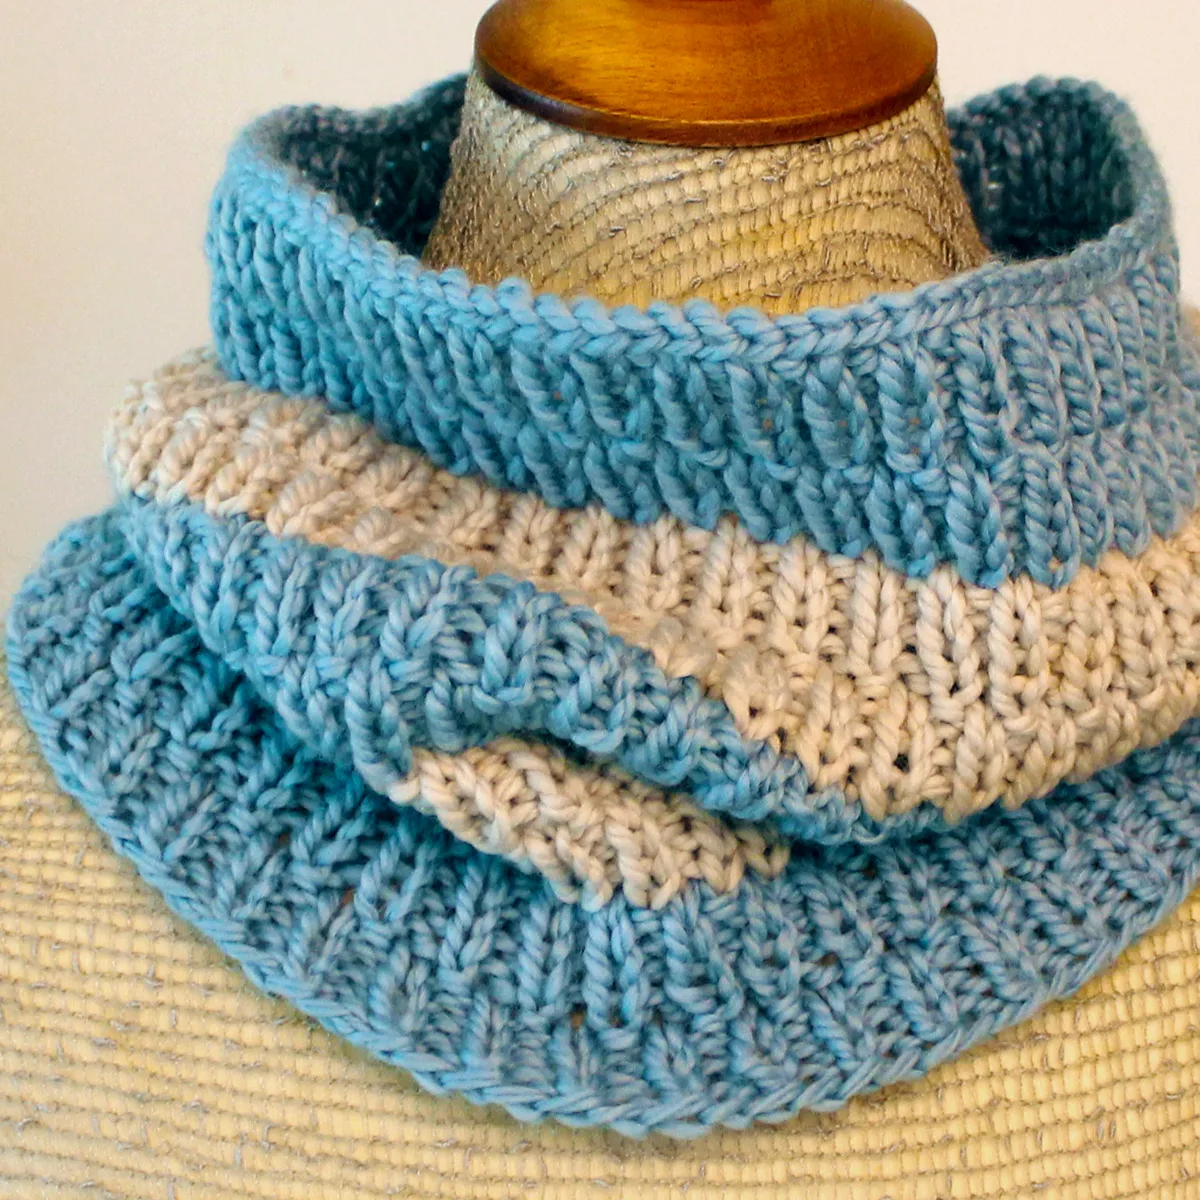 Short Cowl Scarf with long raindrops texture knit in in two colors of beige and light blue yarn color displayed on mannequin.